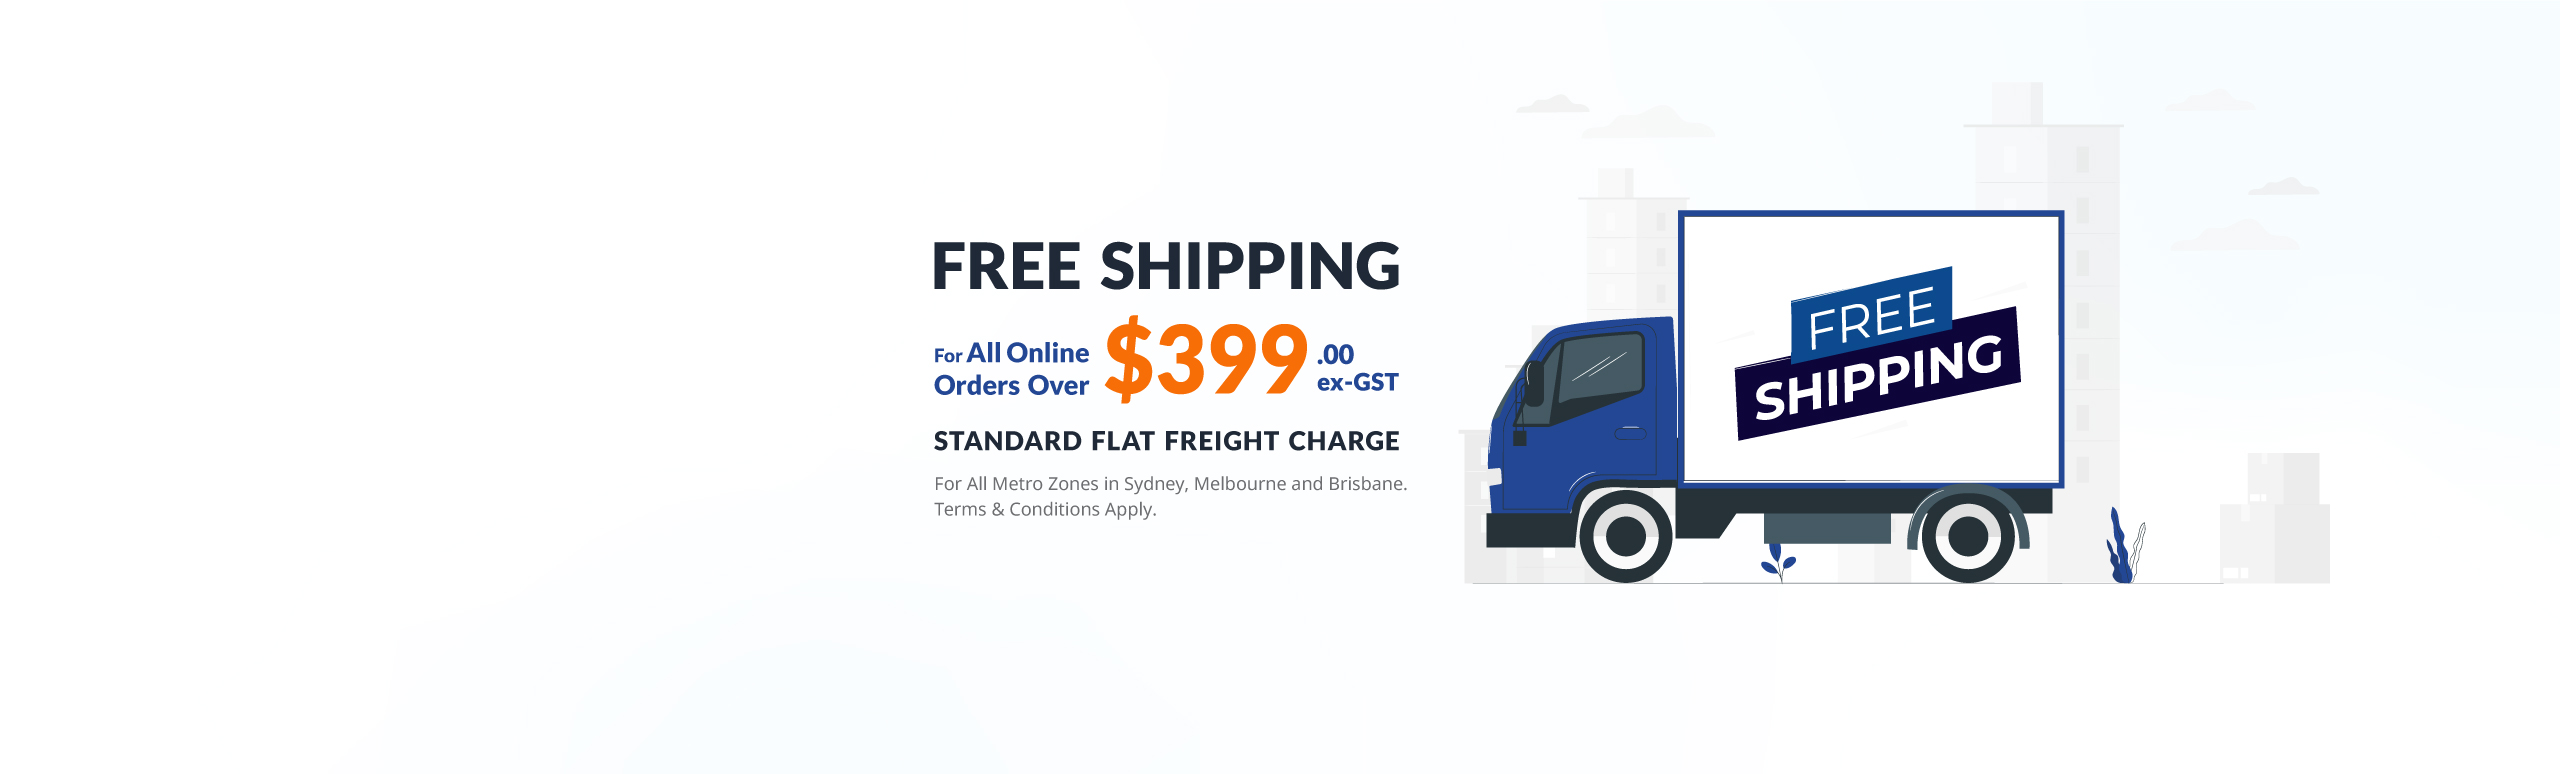 Free Shipping for online orders over $399+GST.